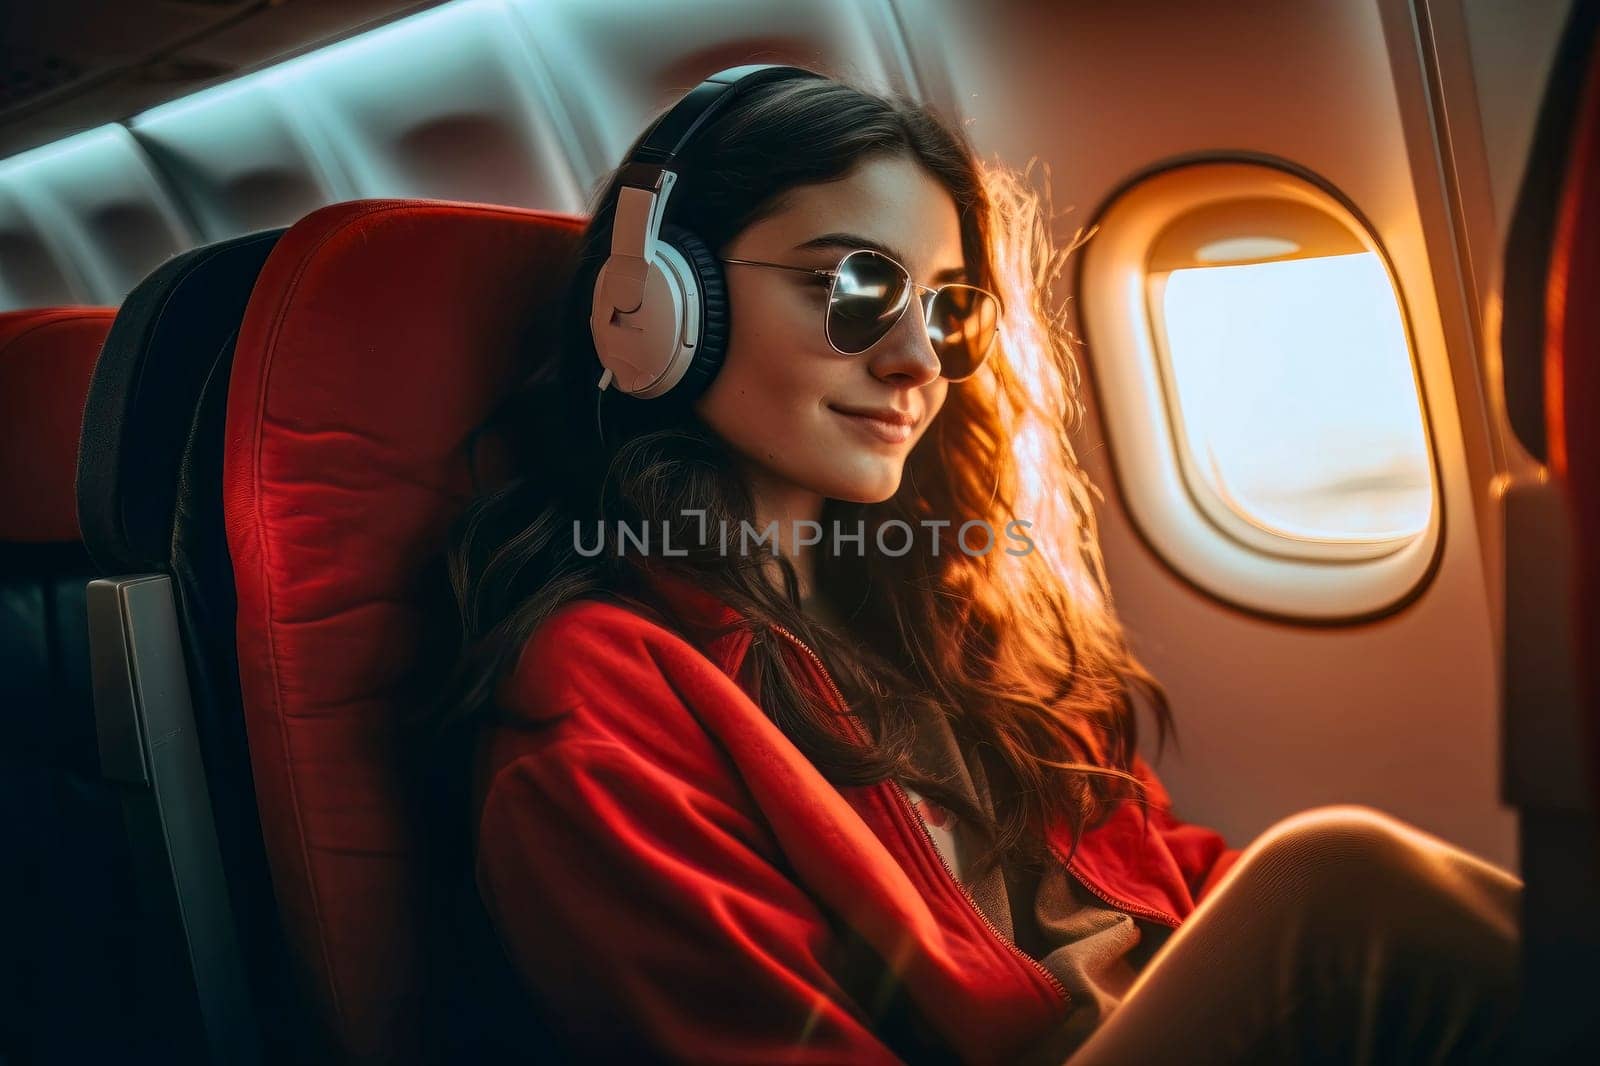 Experience the joy of travel and music with this image of a happy girl wearing headphones on an airplane